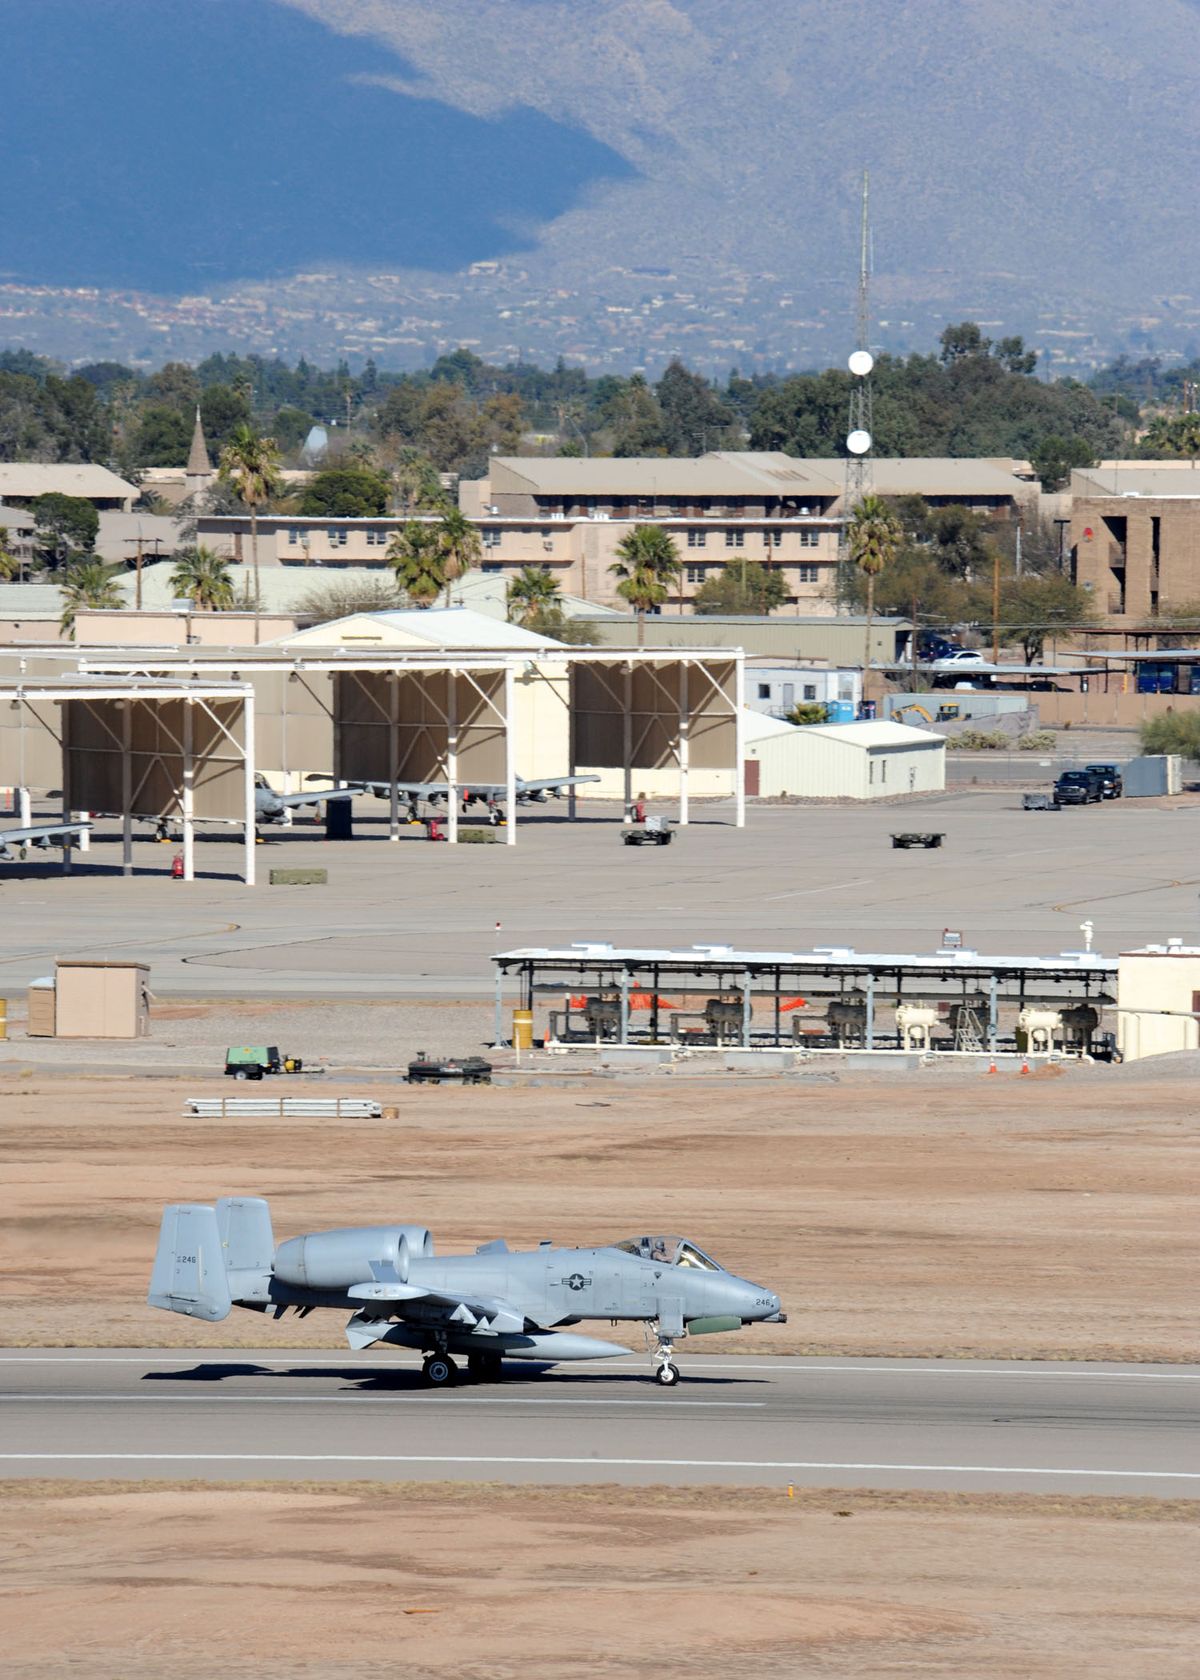 This undated photo provided by the U.S. Air Force shows Davis-Monthan Air Force Base near Tucson, Ariz. The base was on lockdown Friday afternoon, Sept. 16, 2011 amid unconfirmed reports of gunfire. (U.s. Air Force)